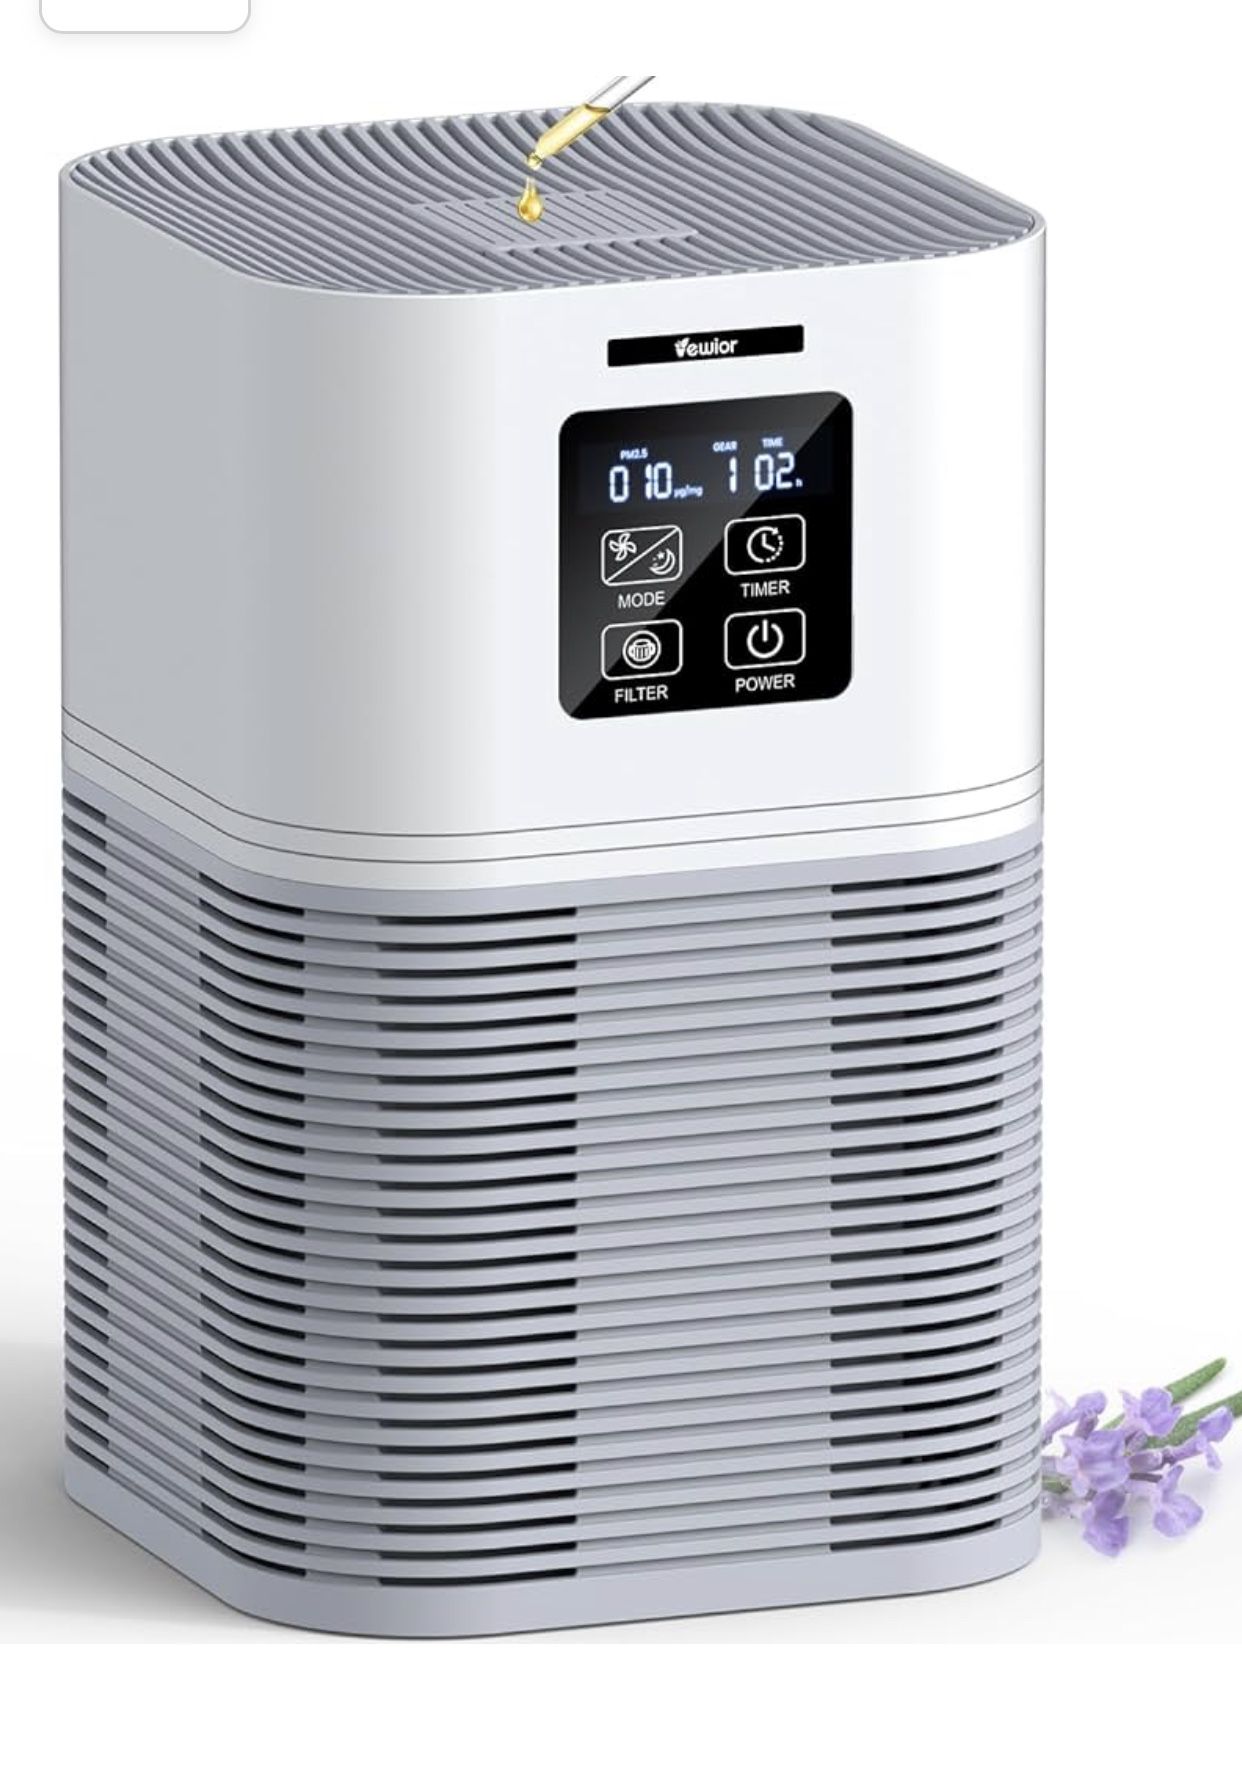 VEWIOR Air Purifiers for Home, HEPA Air Purifiers for Large Room up to 600 sq.ft, H13 True HEPA Air Filter with Fragrance Sponge 6 Timers Quiet Air Cl